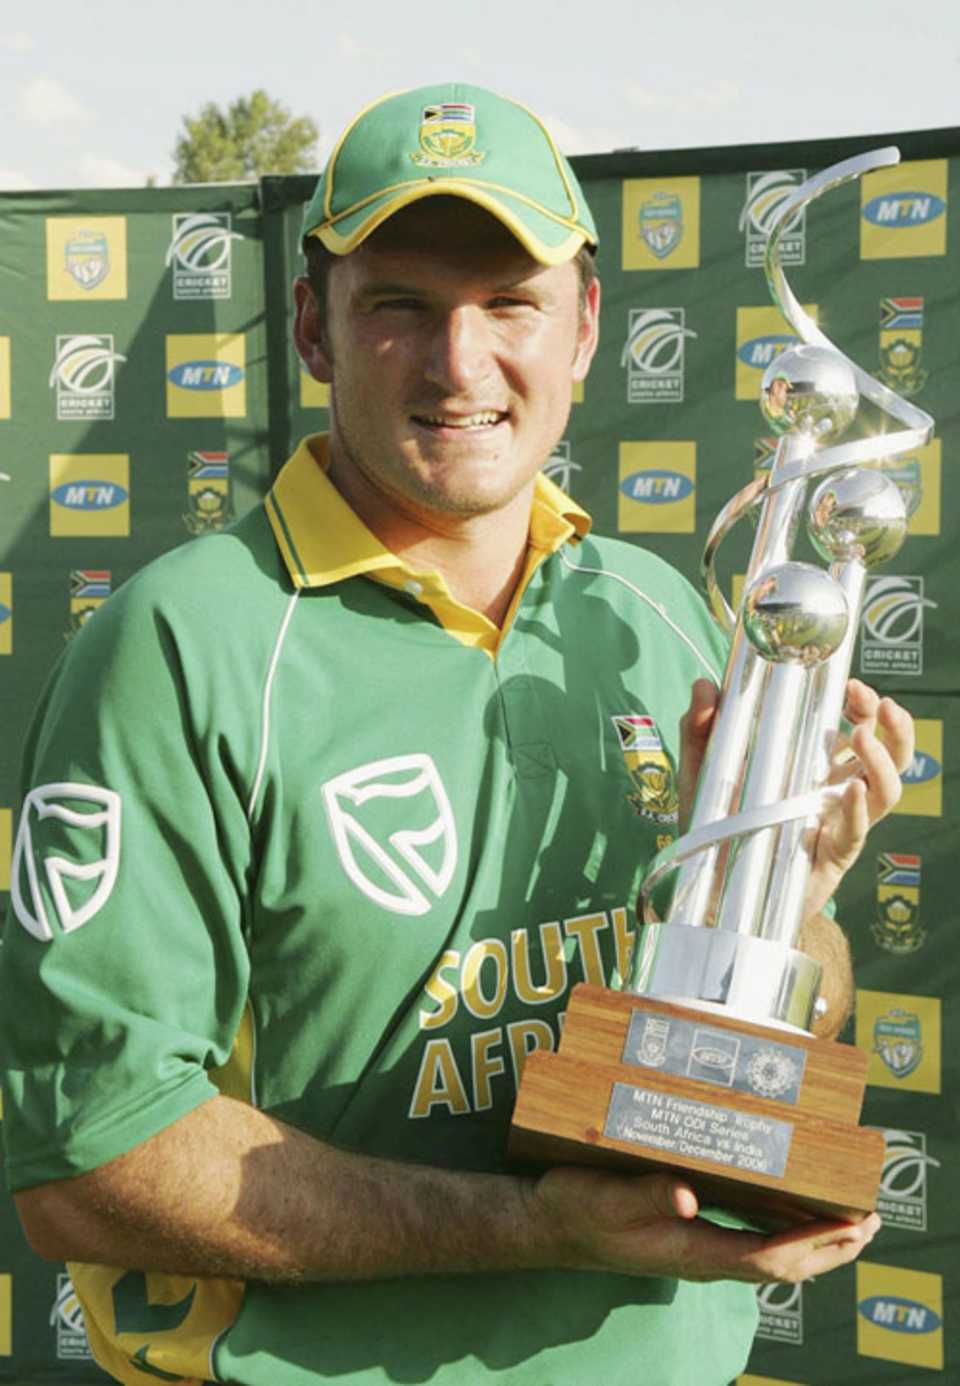 Graeme Smith with the series trophy after a 4-0 whitewash